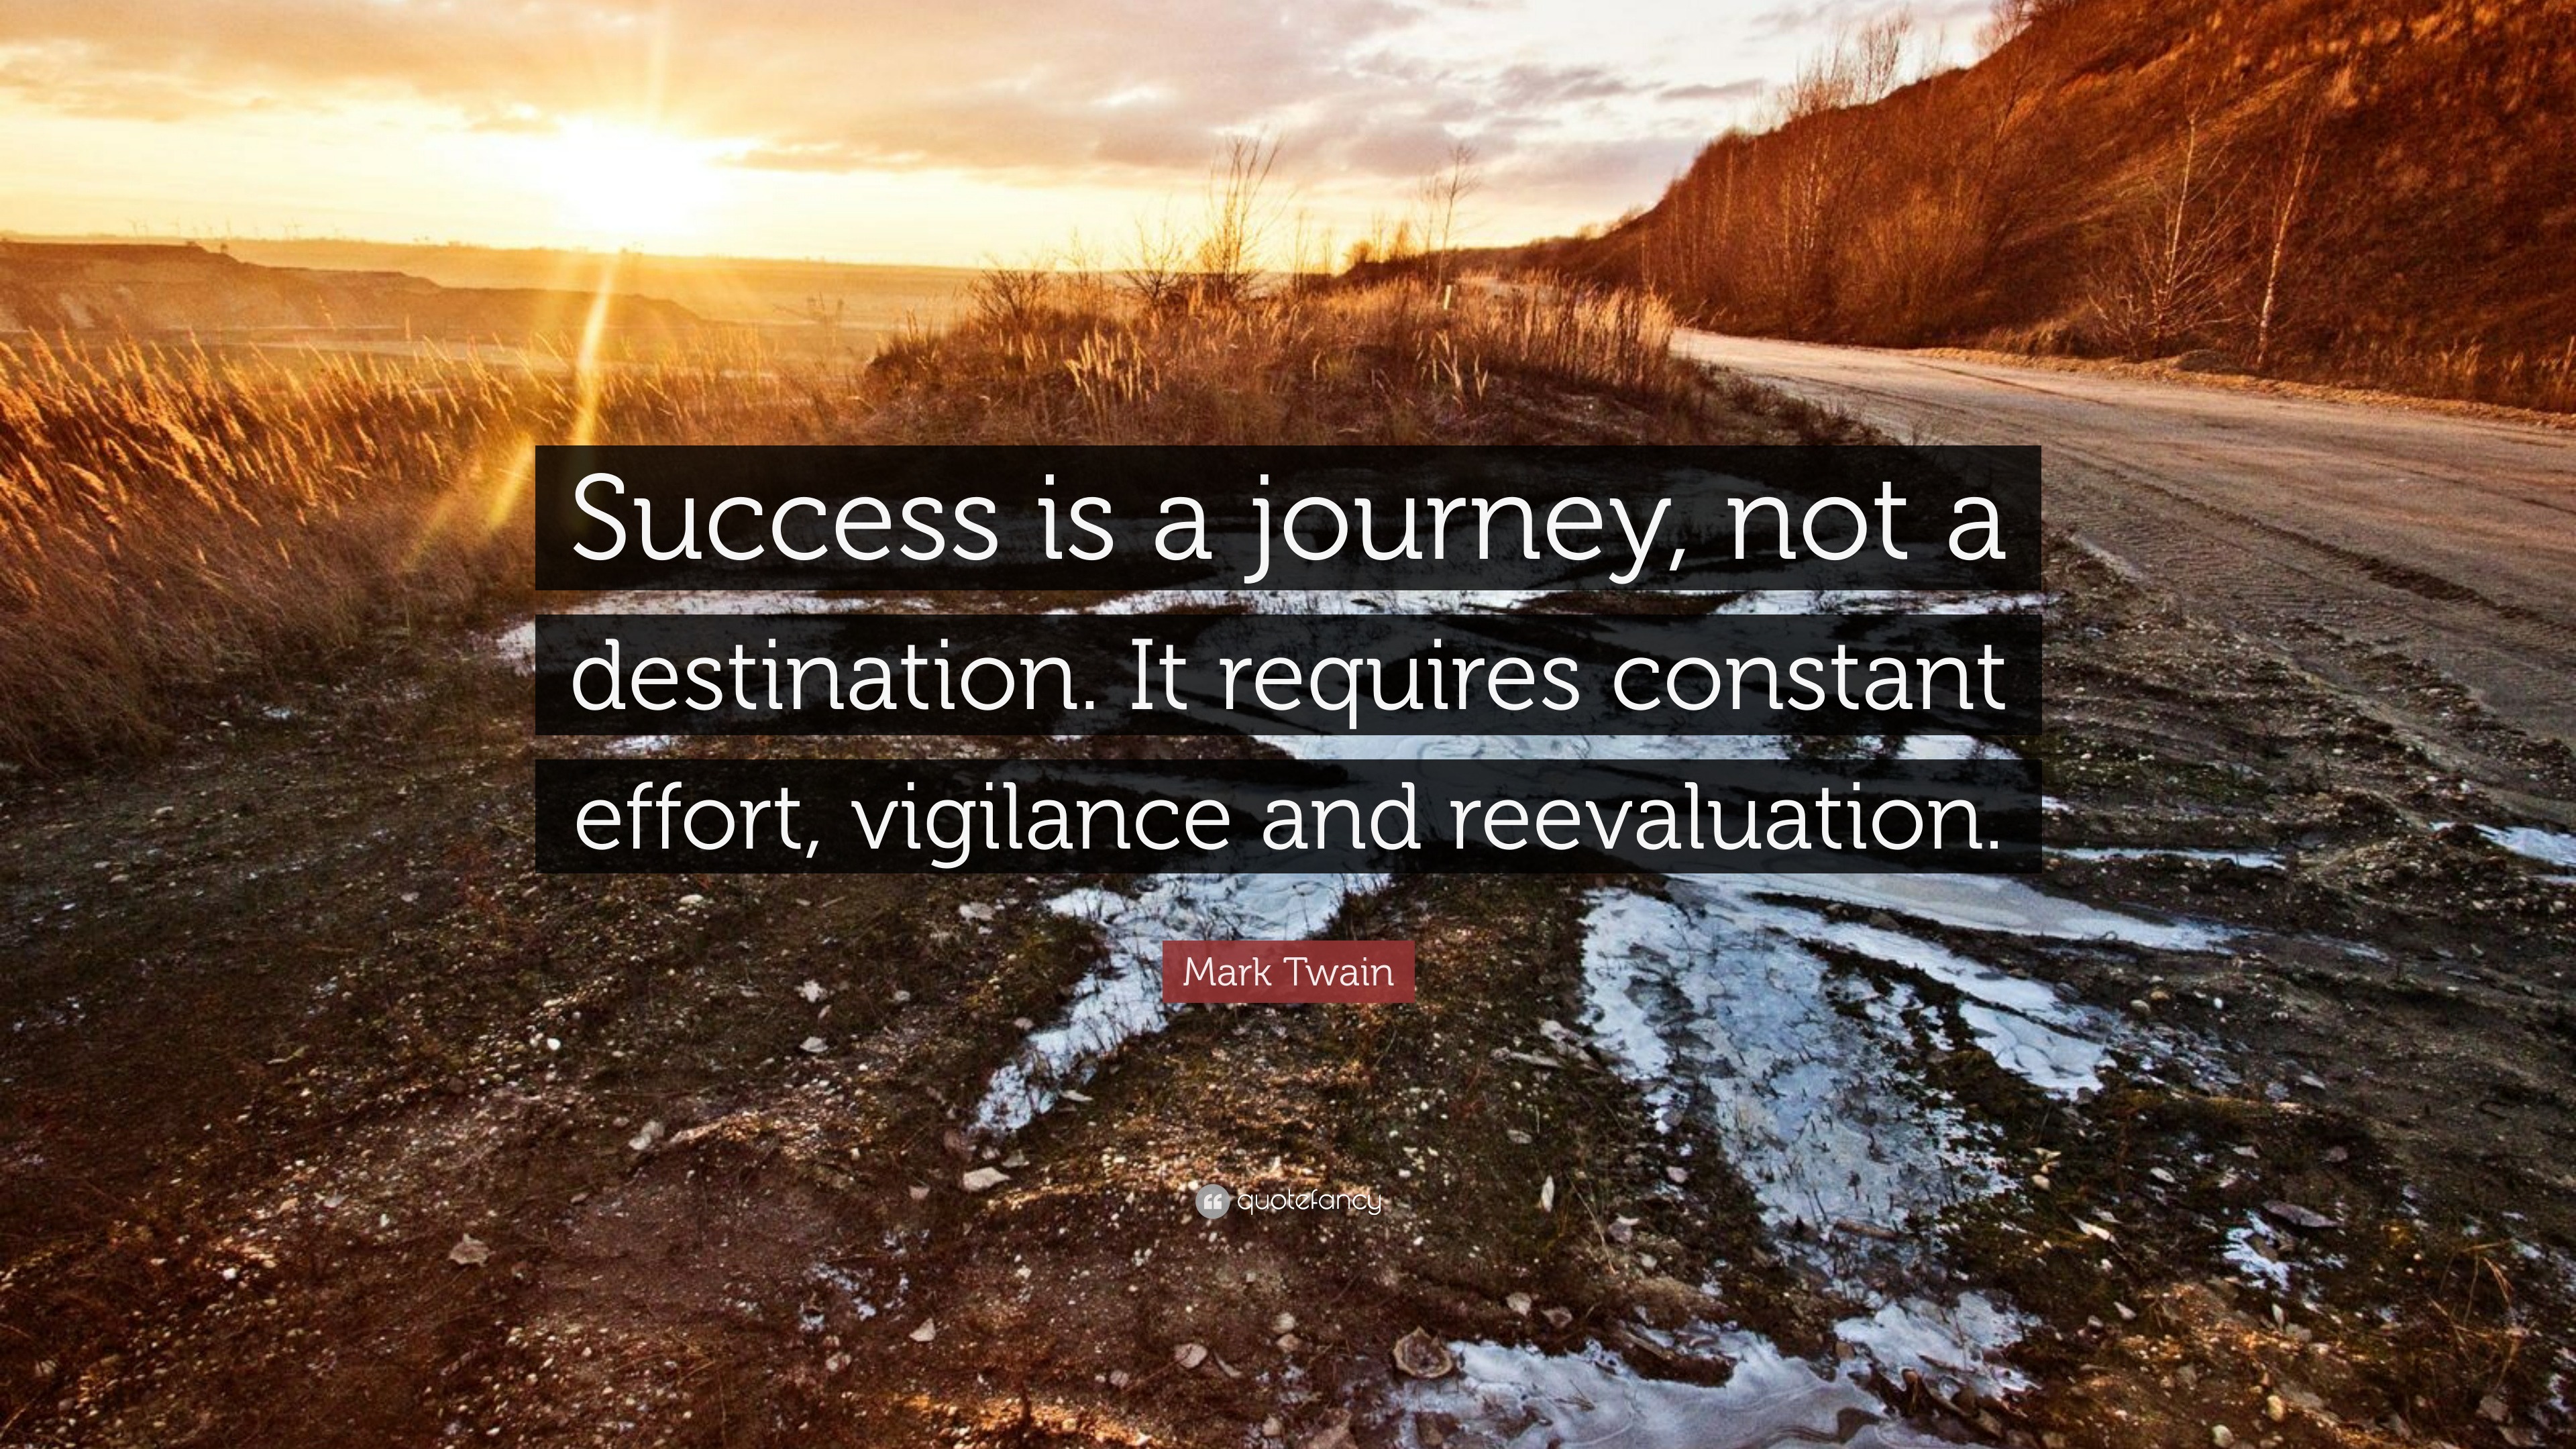 mark-twain-quote-success-is-a-journey-not-a-destination-it-requires